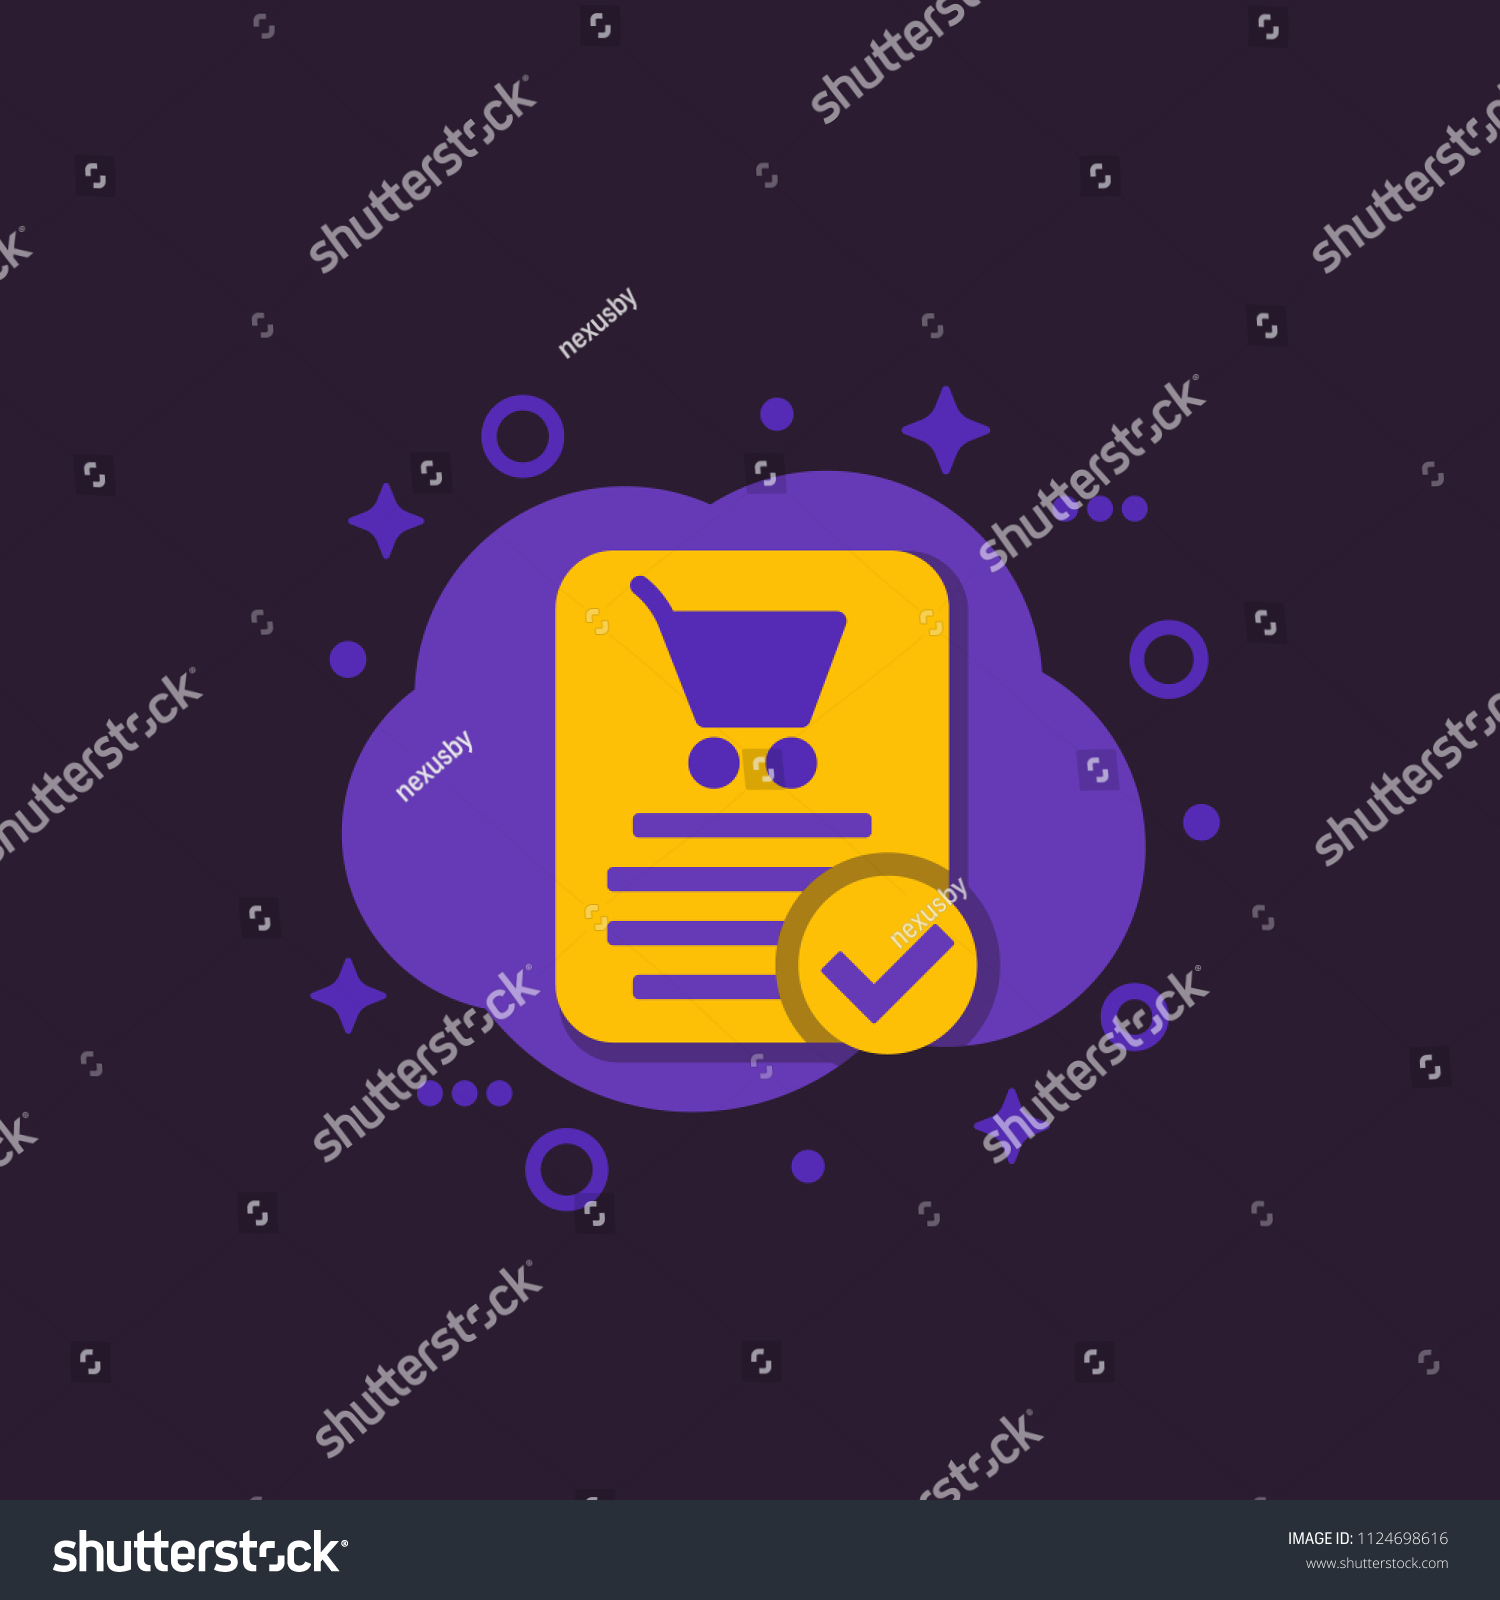 SVG of online order, purchase completed, e-commerce icon svg